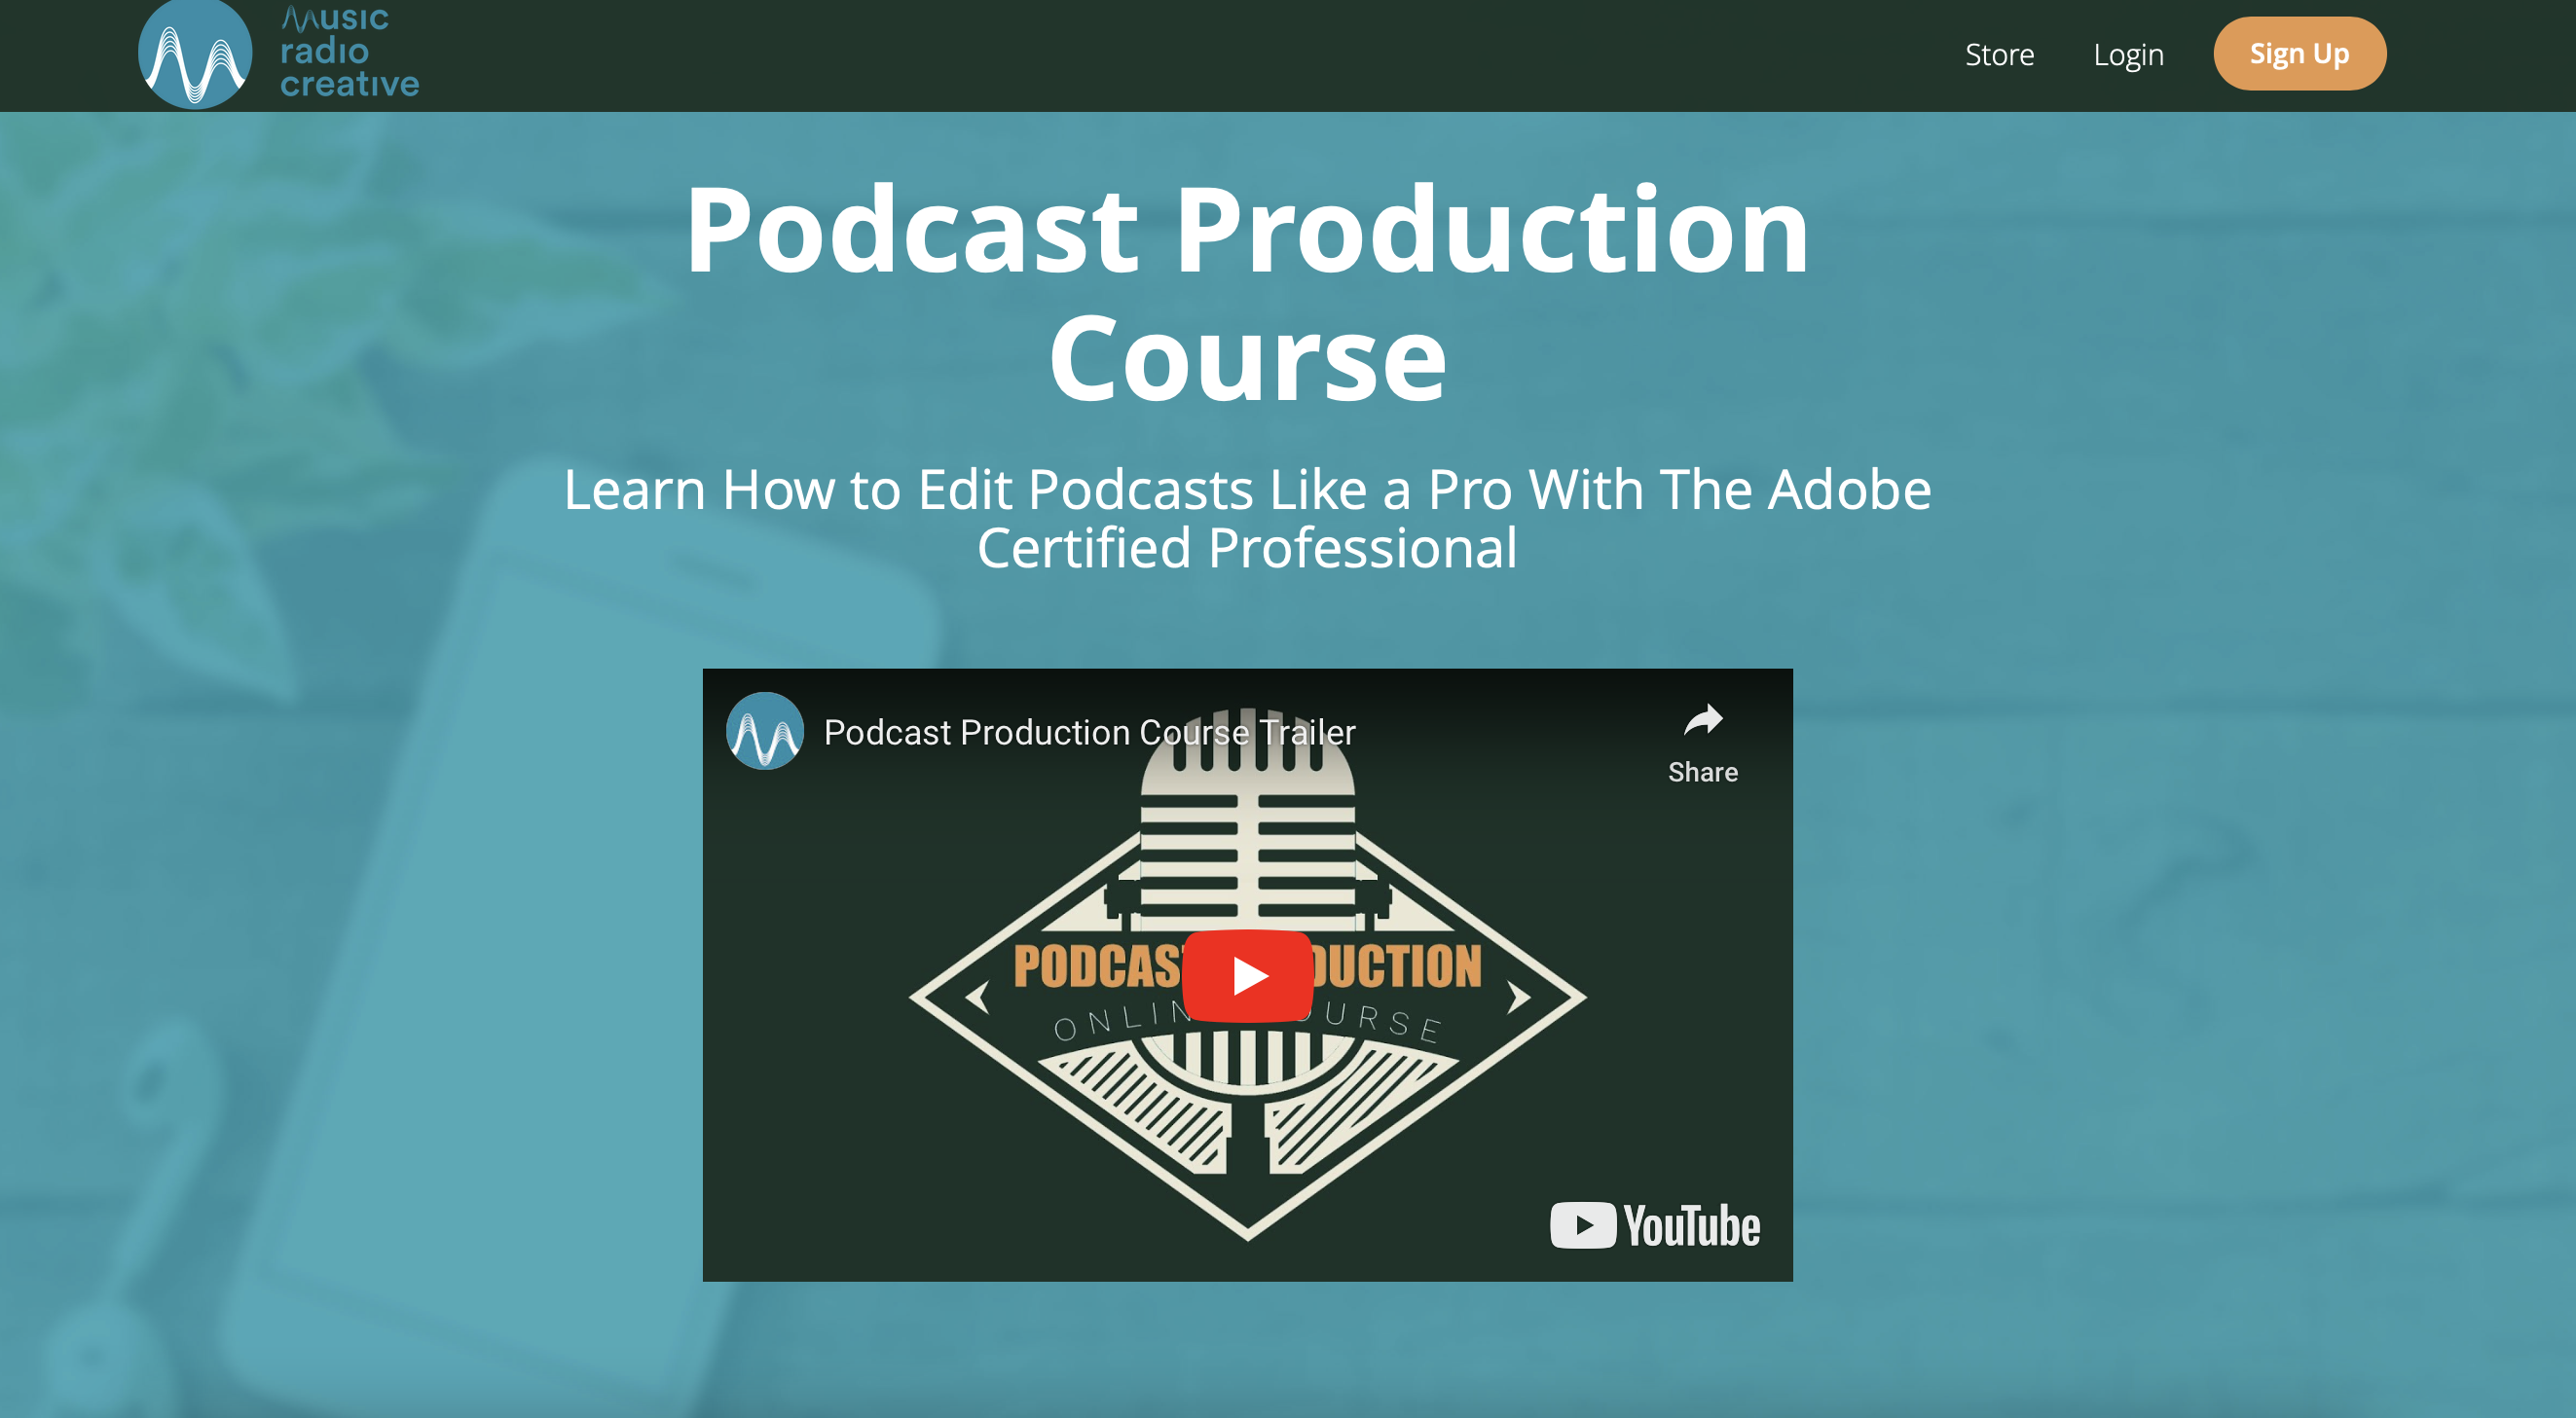 Podcast Production Course by Mike Russell at Music Radio Creative